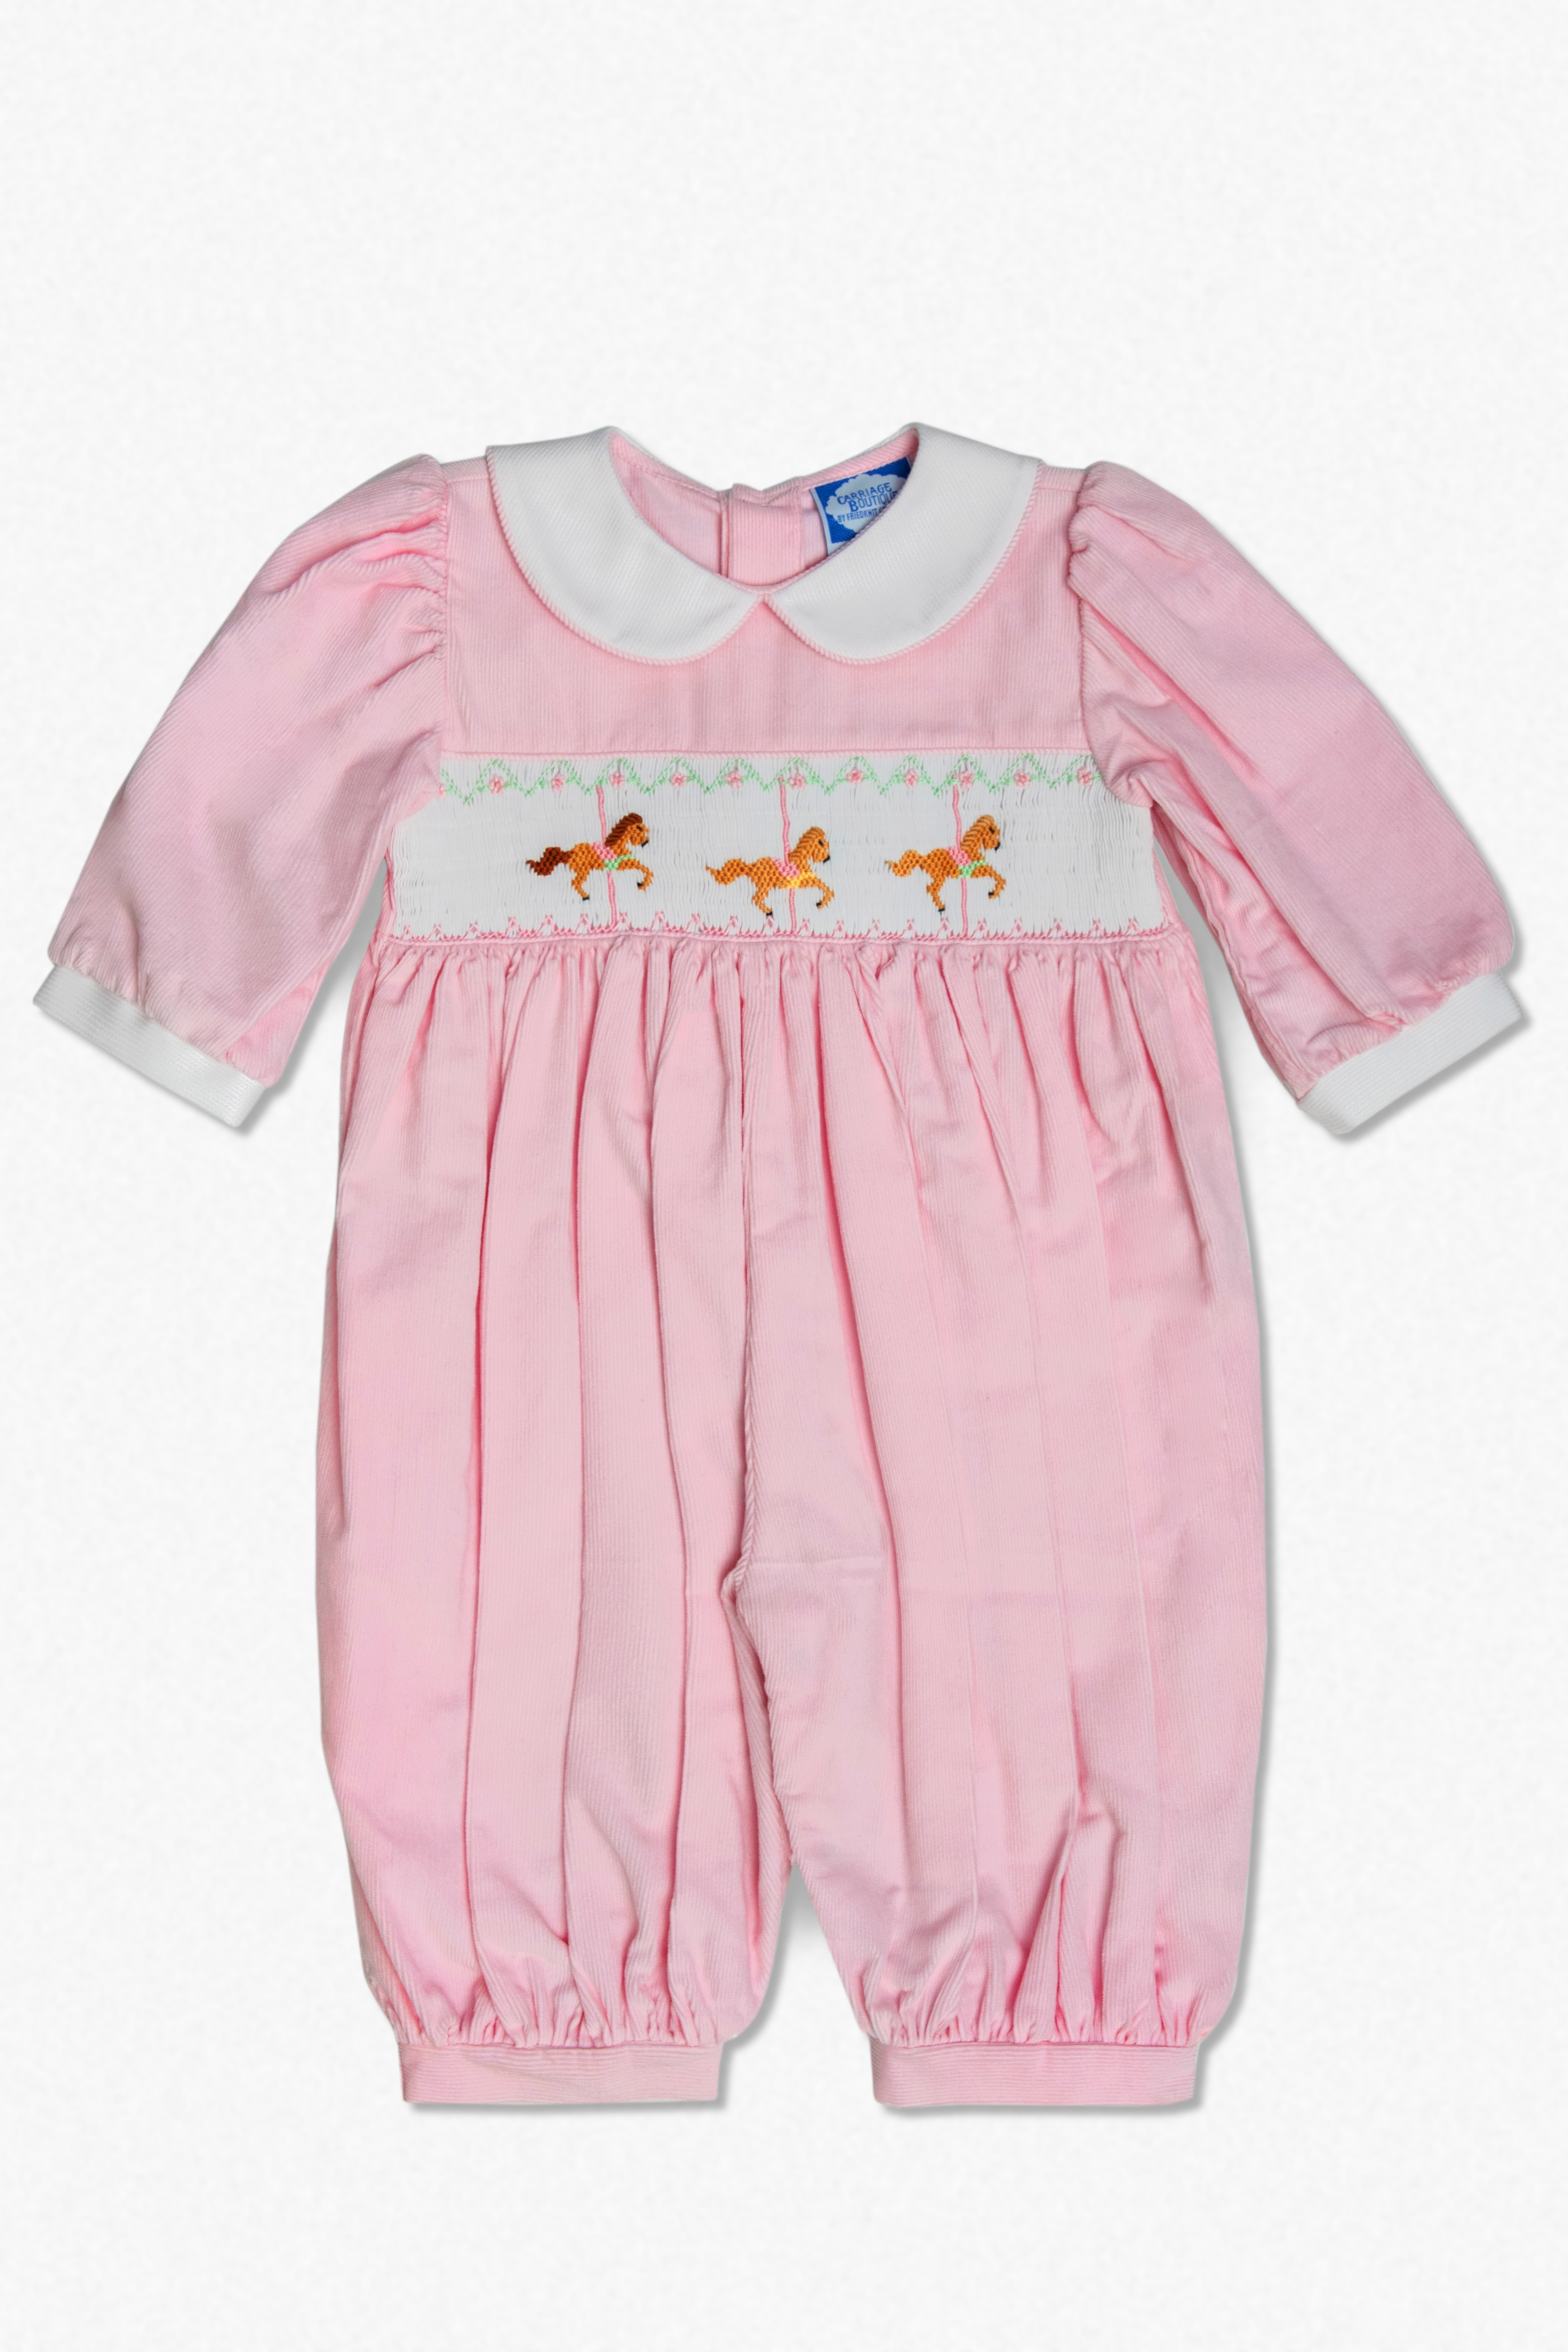 22228-Pink Long Sleeve Baby Girl Romper with Smocked Horses